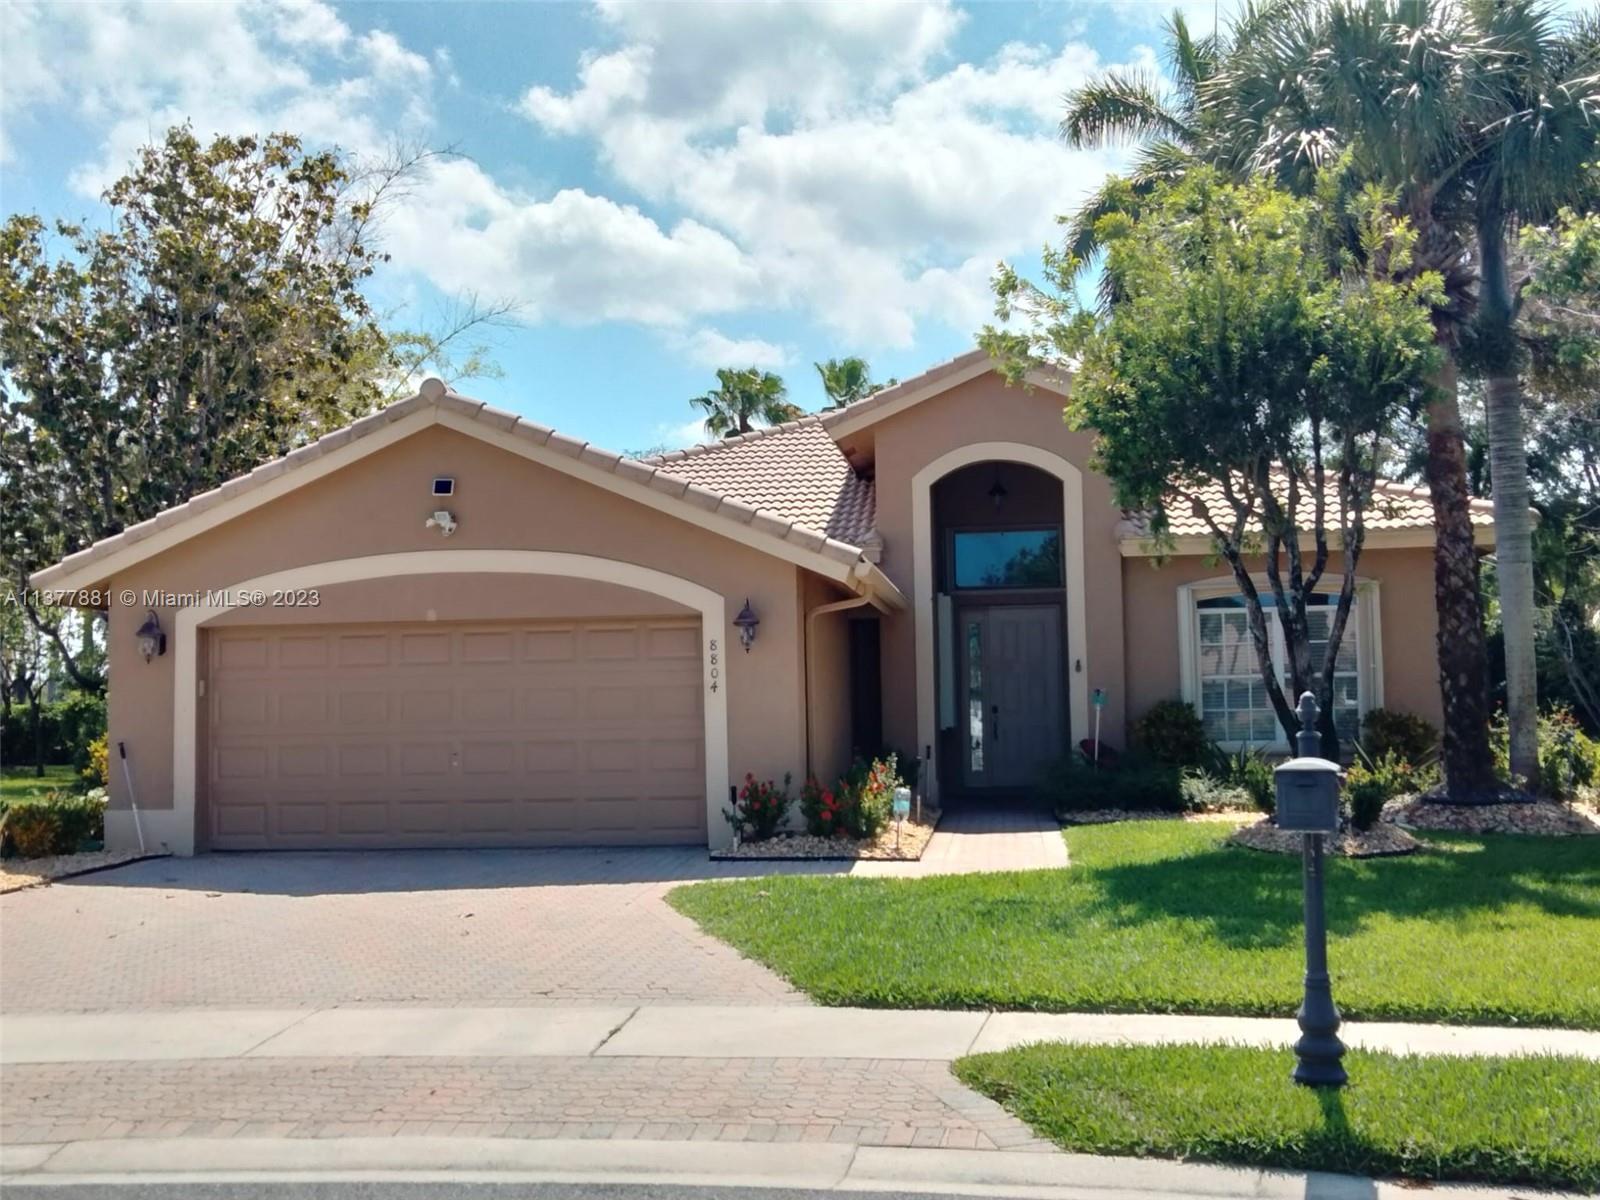 Stunning 3BR/2BA home in Venetian Isles, a highly sought-after gated, active, friendly and well-mana